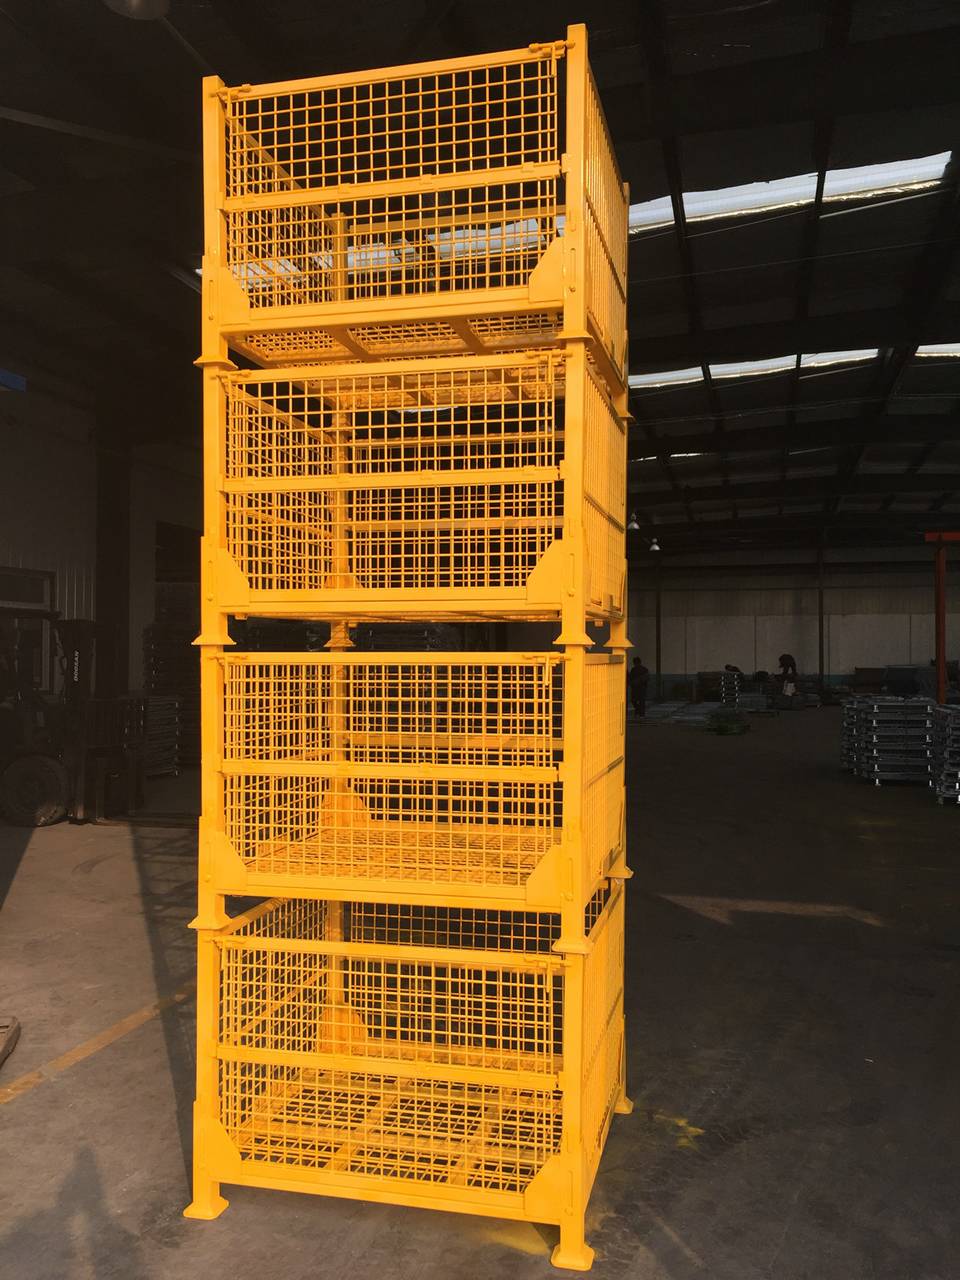 Four yellow welded wire container are stacked together in workshop.